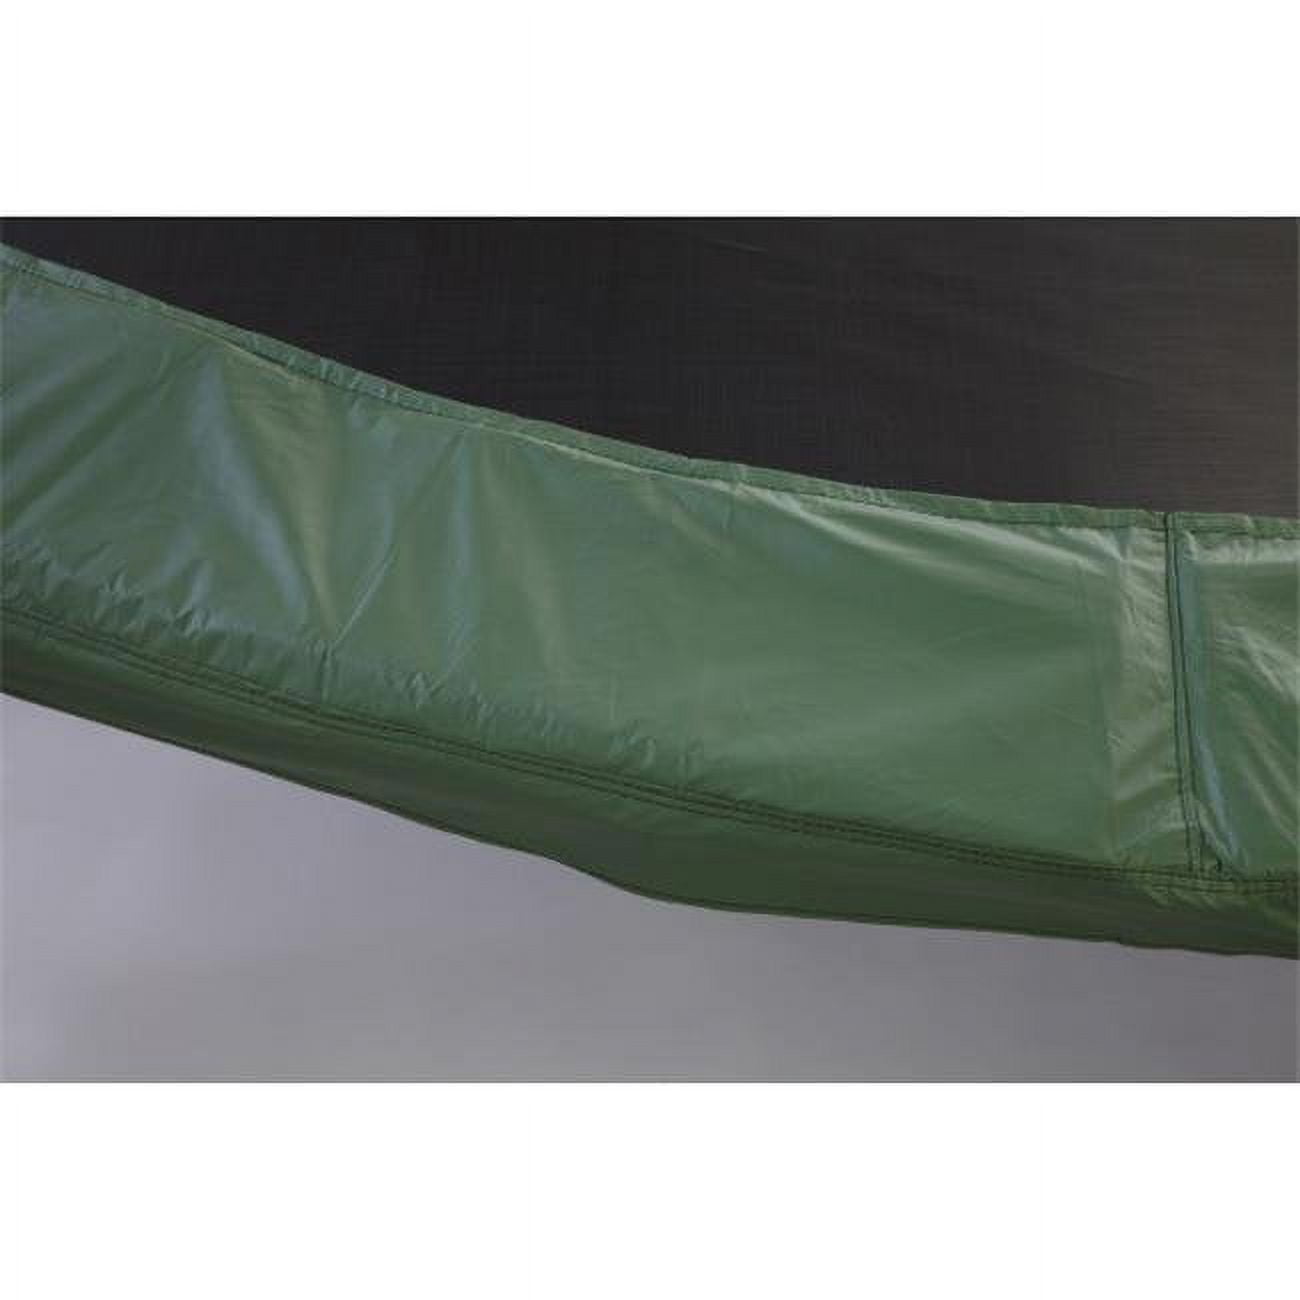 JumpKing PAD15-10G 15 ft. x 10 in. Wide Safety Pad  Green